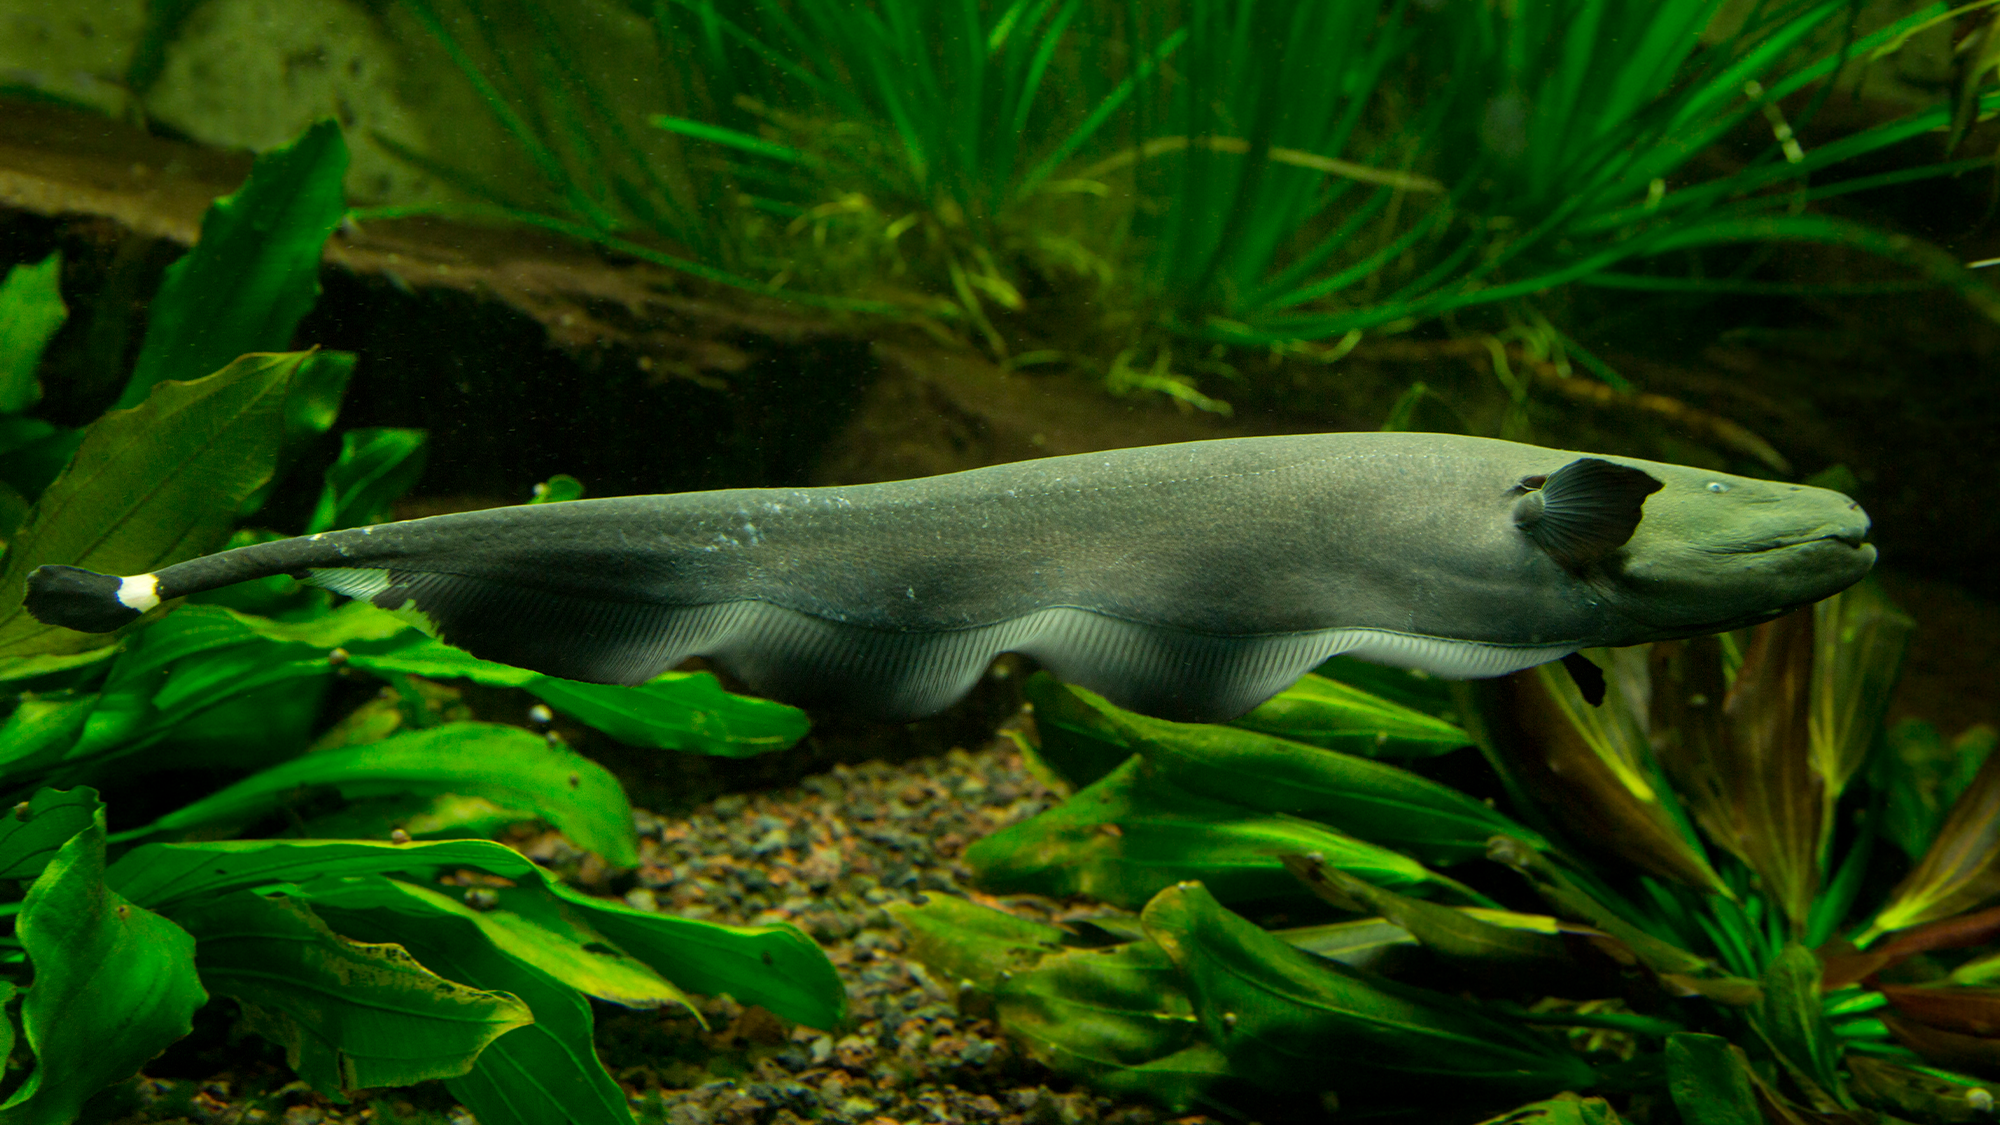 A long torpedo-shaped fish swims among green plants. Knifefish like the black ghost knifefish are known for their shimmying motions and electrical pulses. and live in freshwater lakes and rivers in Central and South America.